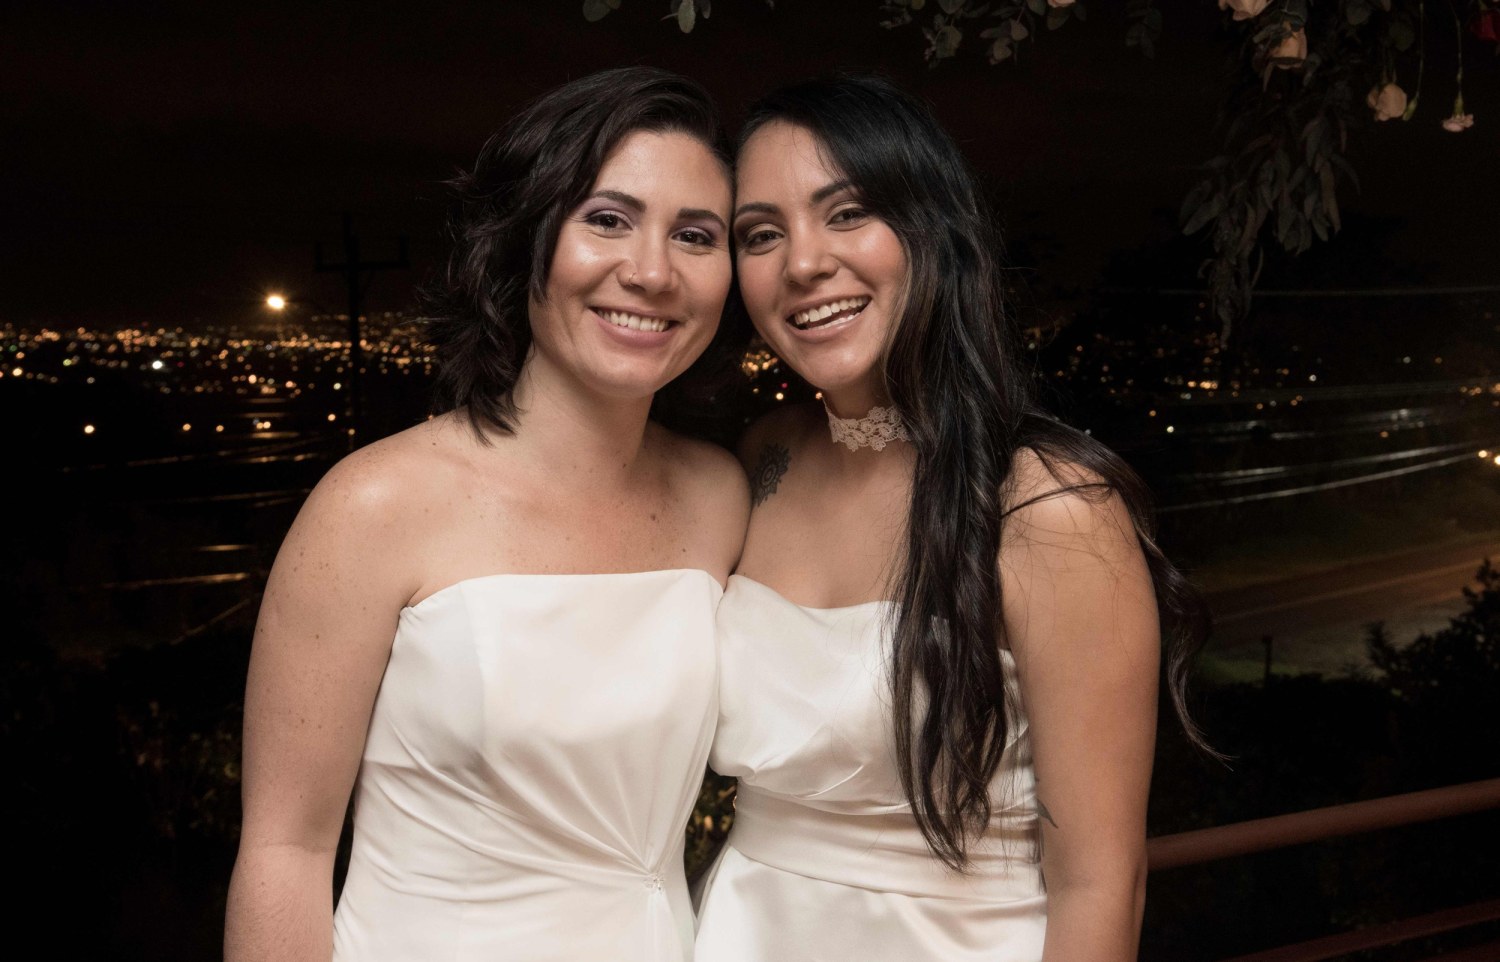 Lesbian couple become Costa Rica's first same-sex spouses